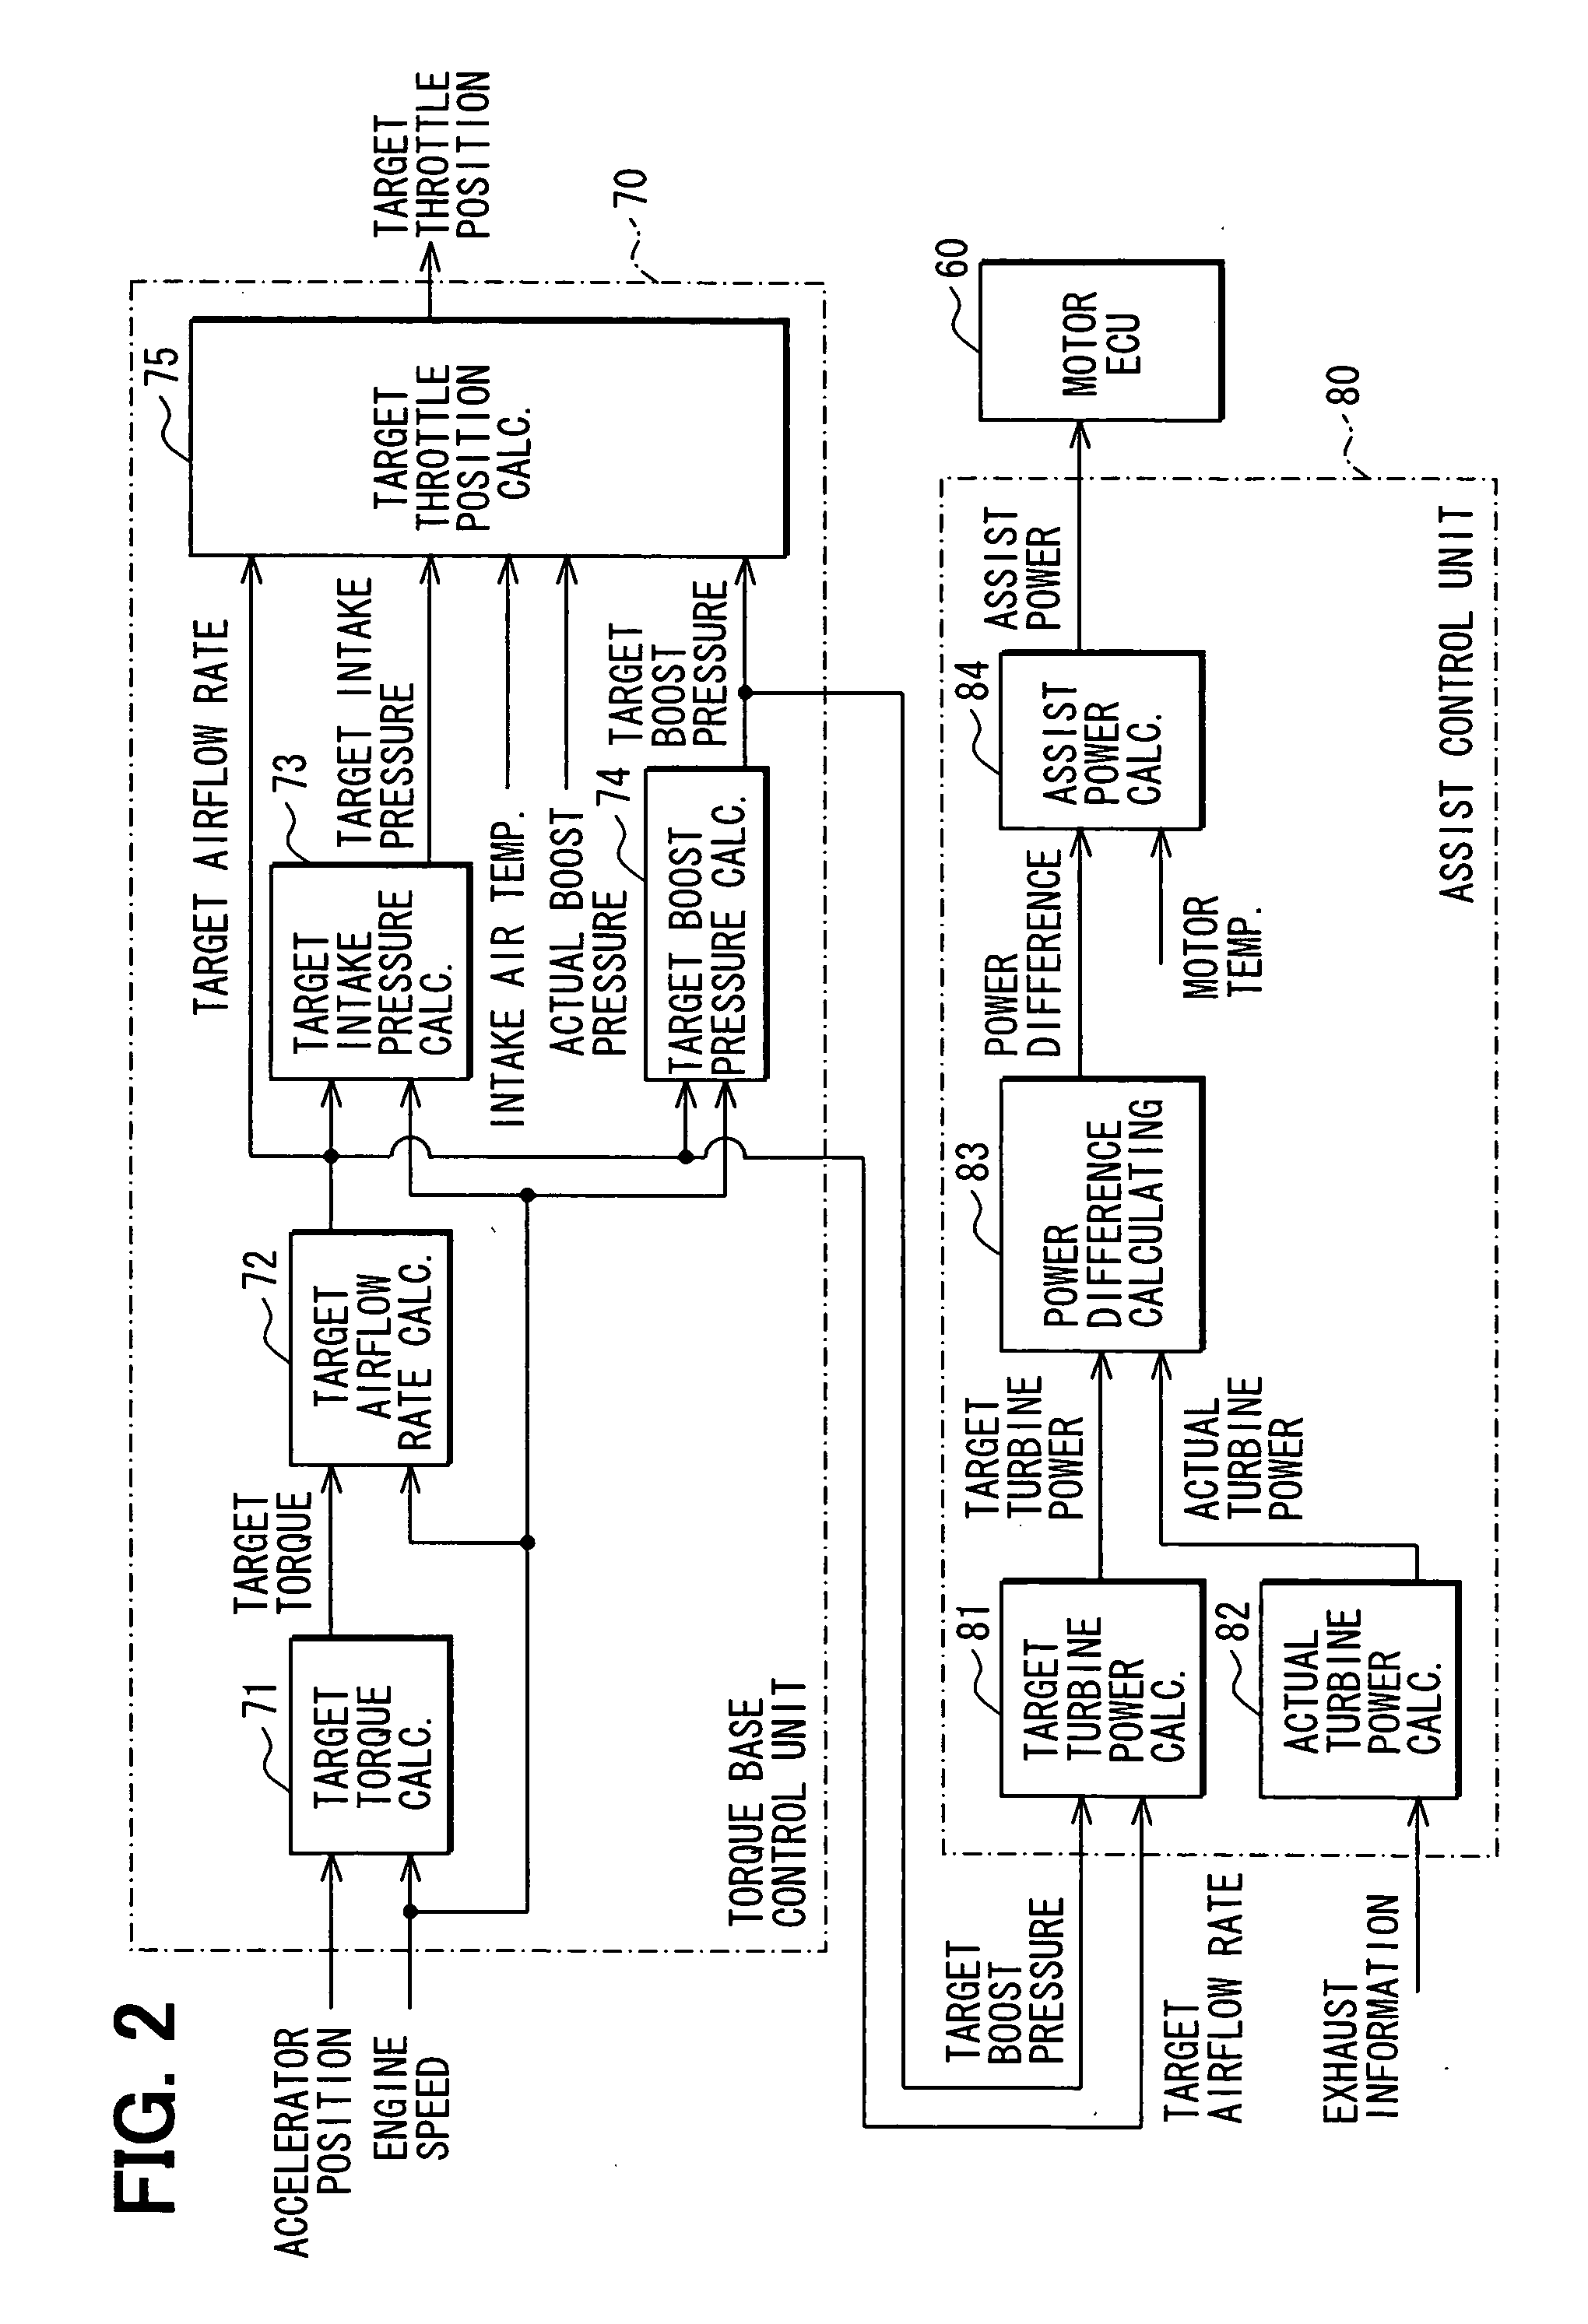 Controller for internal combustion engine with supercharger